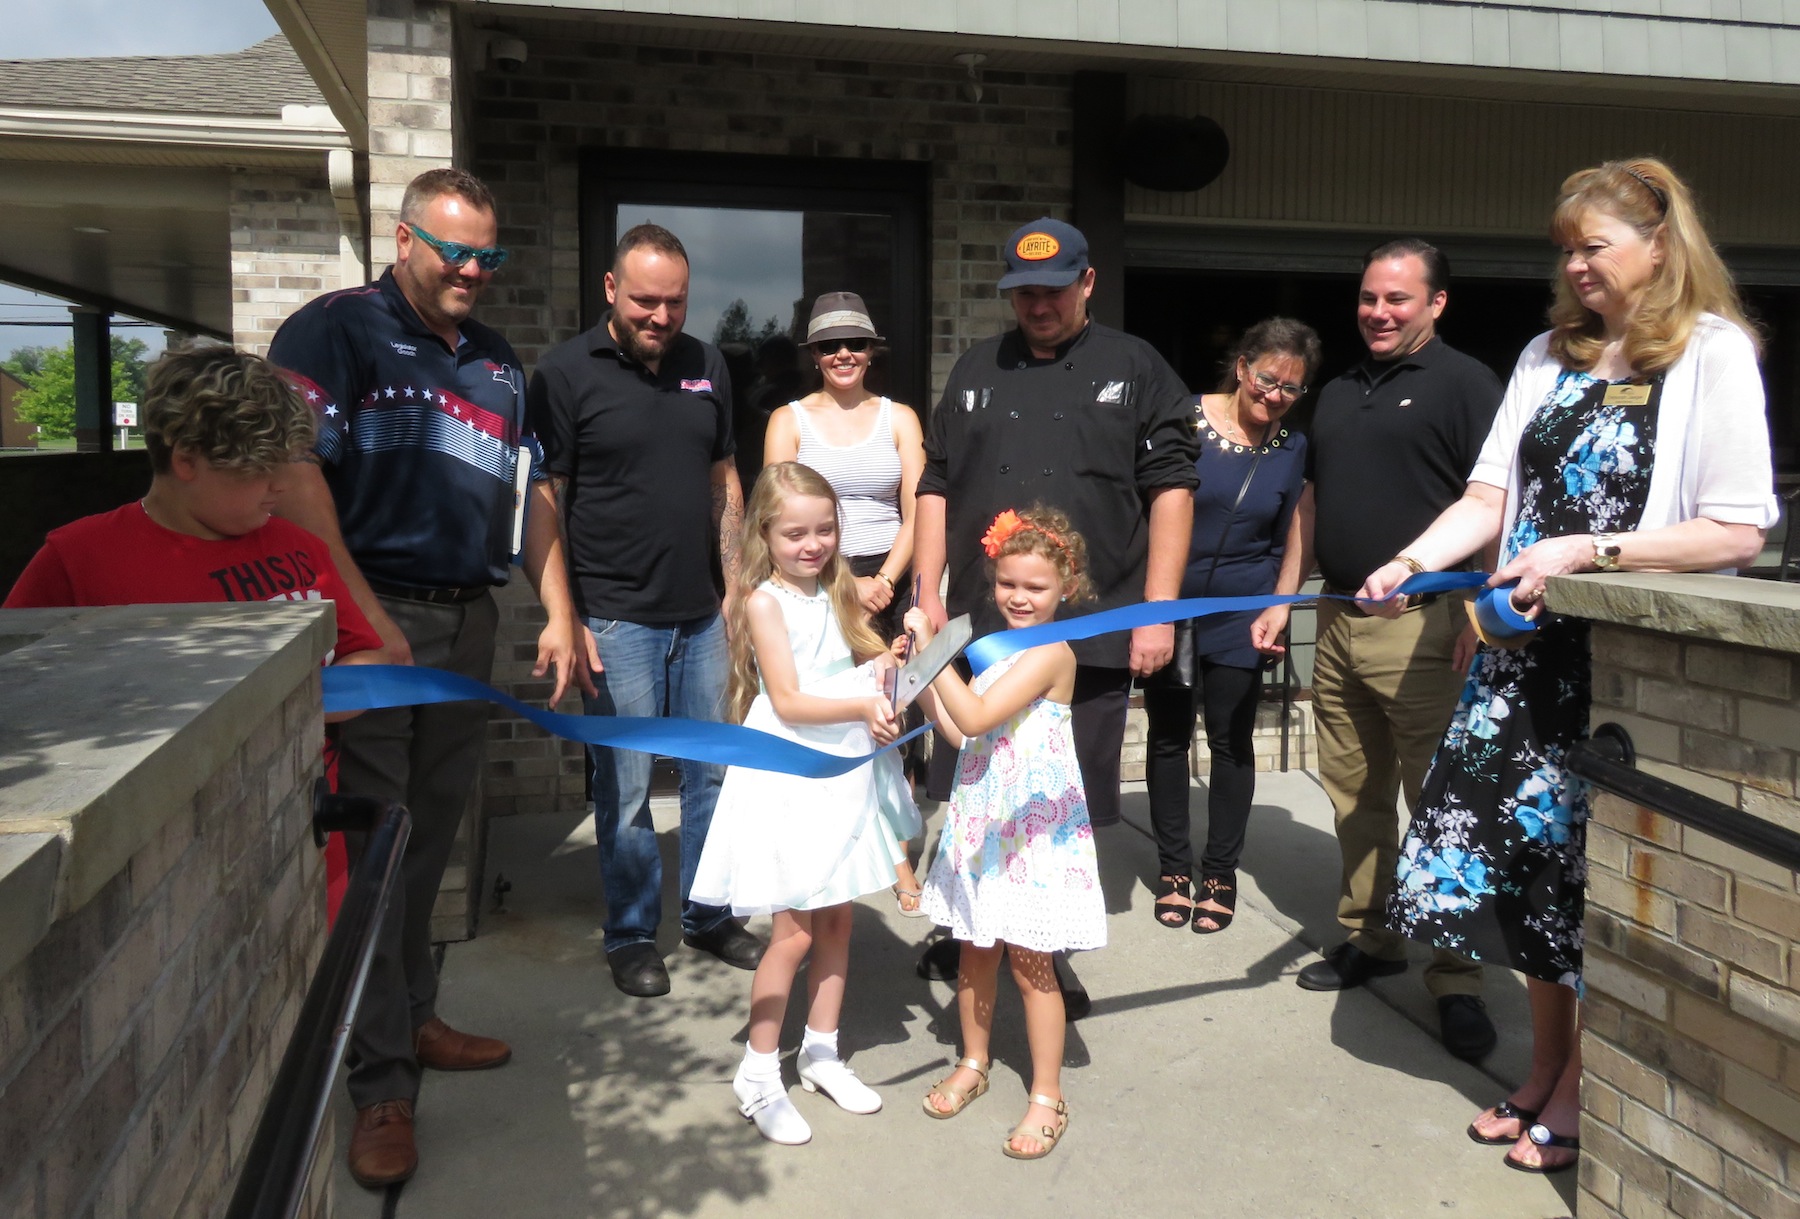 Friends, partners and family of Denny Soliday, along with Niagara County Legislator Jesse Gooch cut the ribbon to Solidays Bar & Grille's next setting at 6935 Ward Road. (Photos by David Yarger)